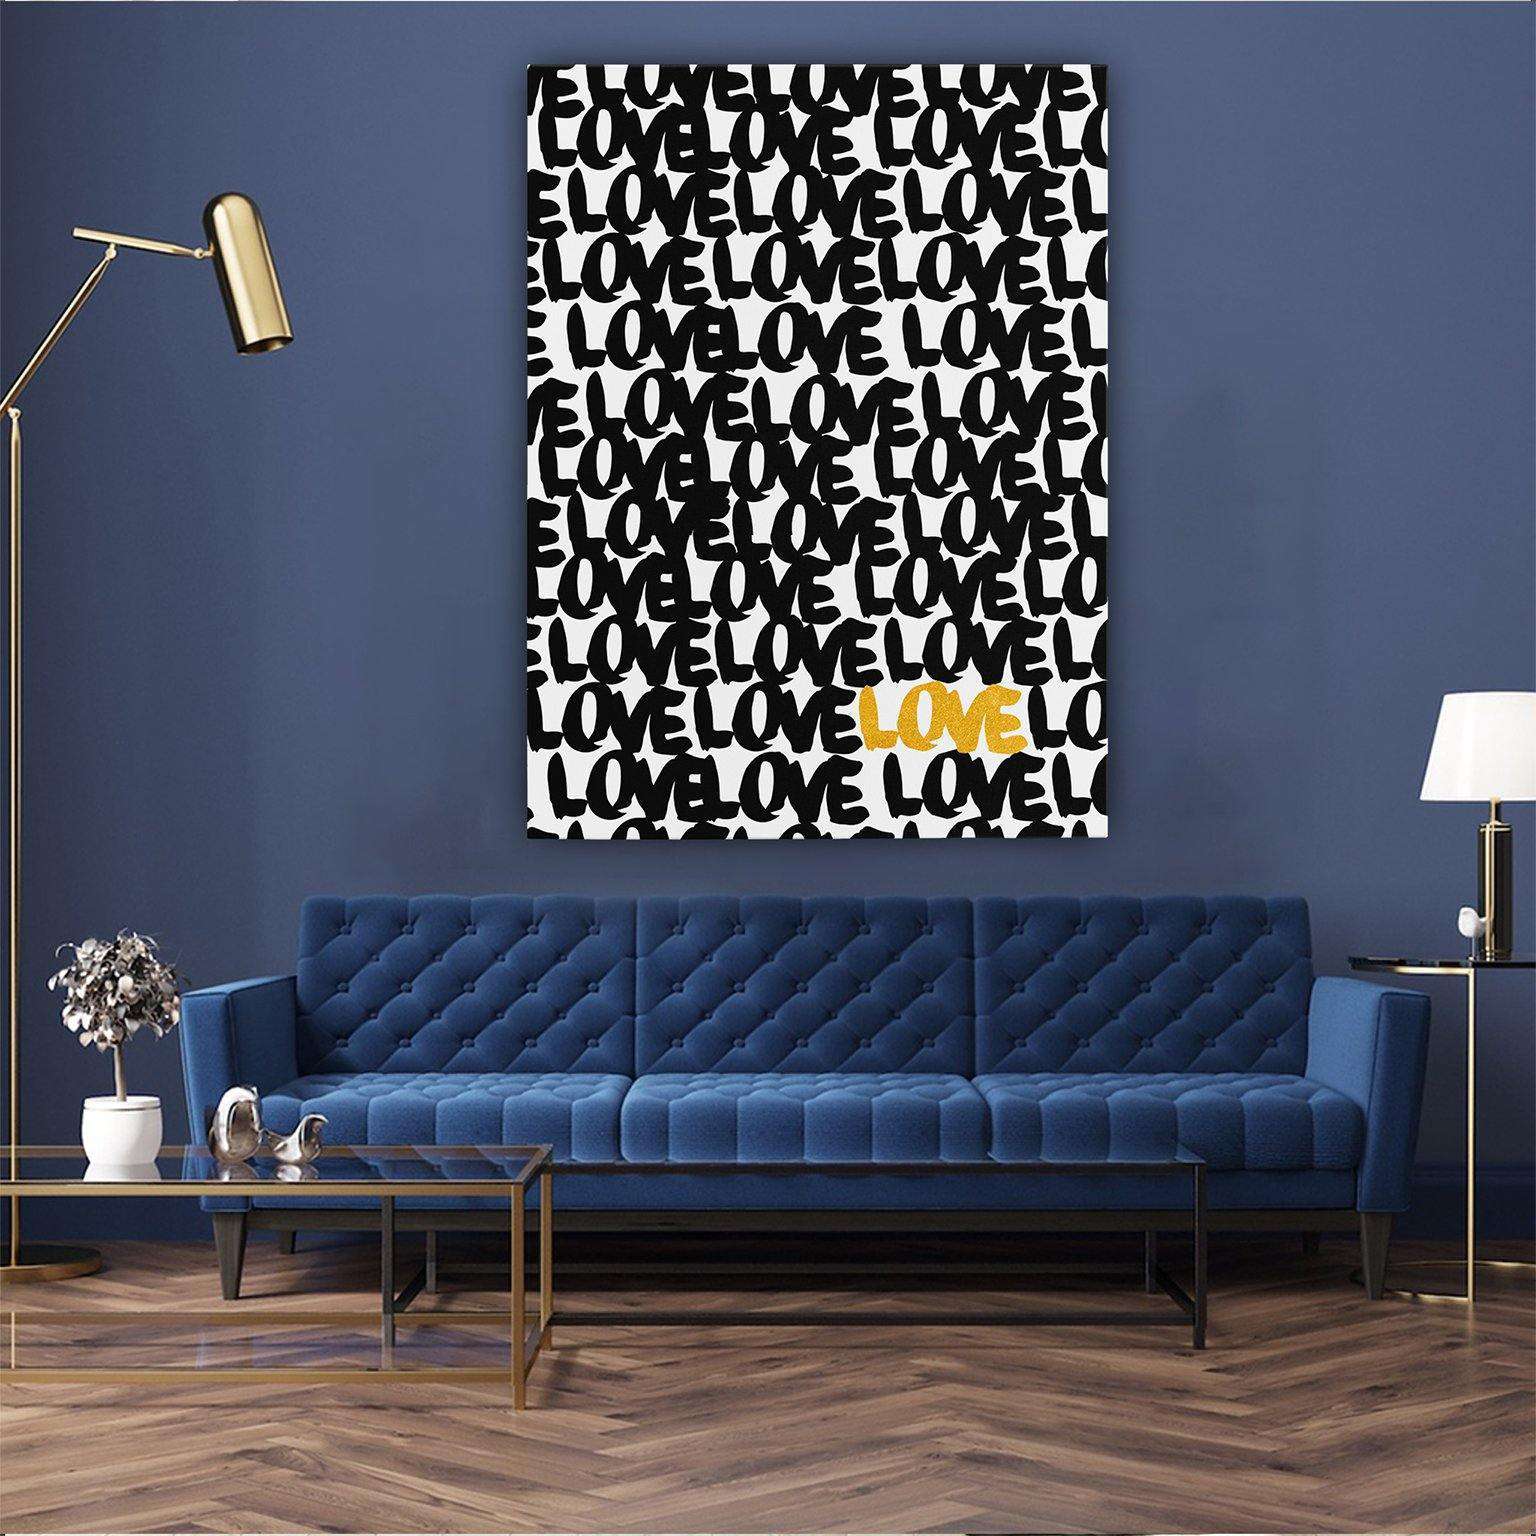 Nothing But Love Canvas Wido 18" x 24" (USA Only) Light 